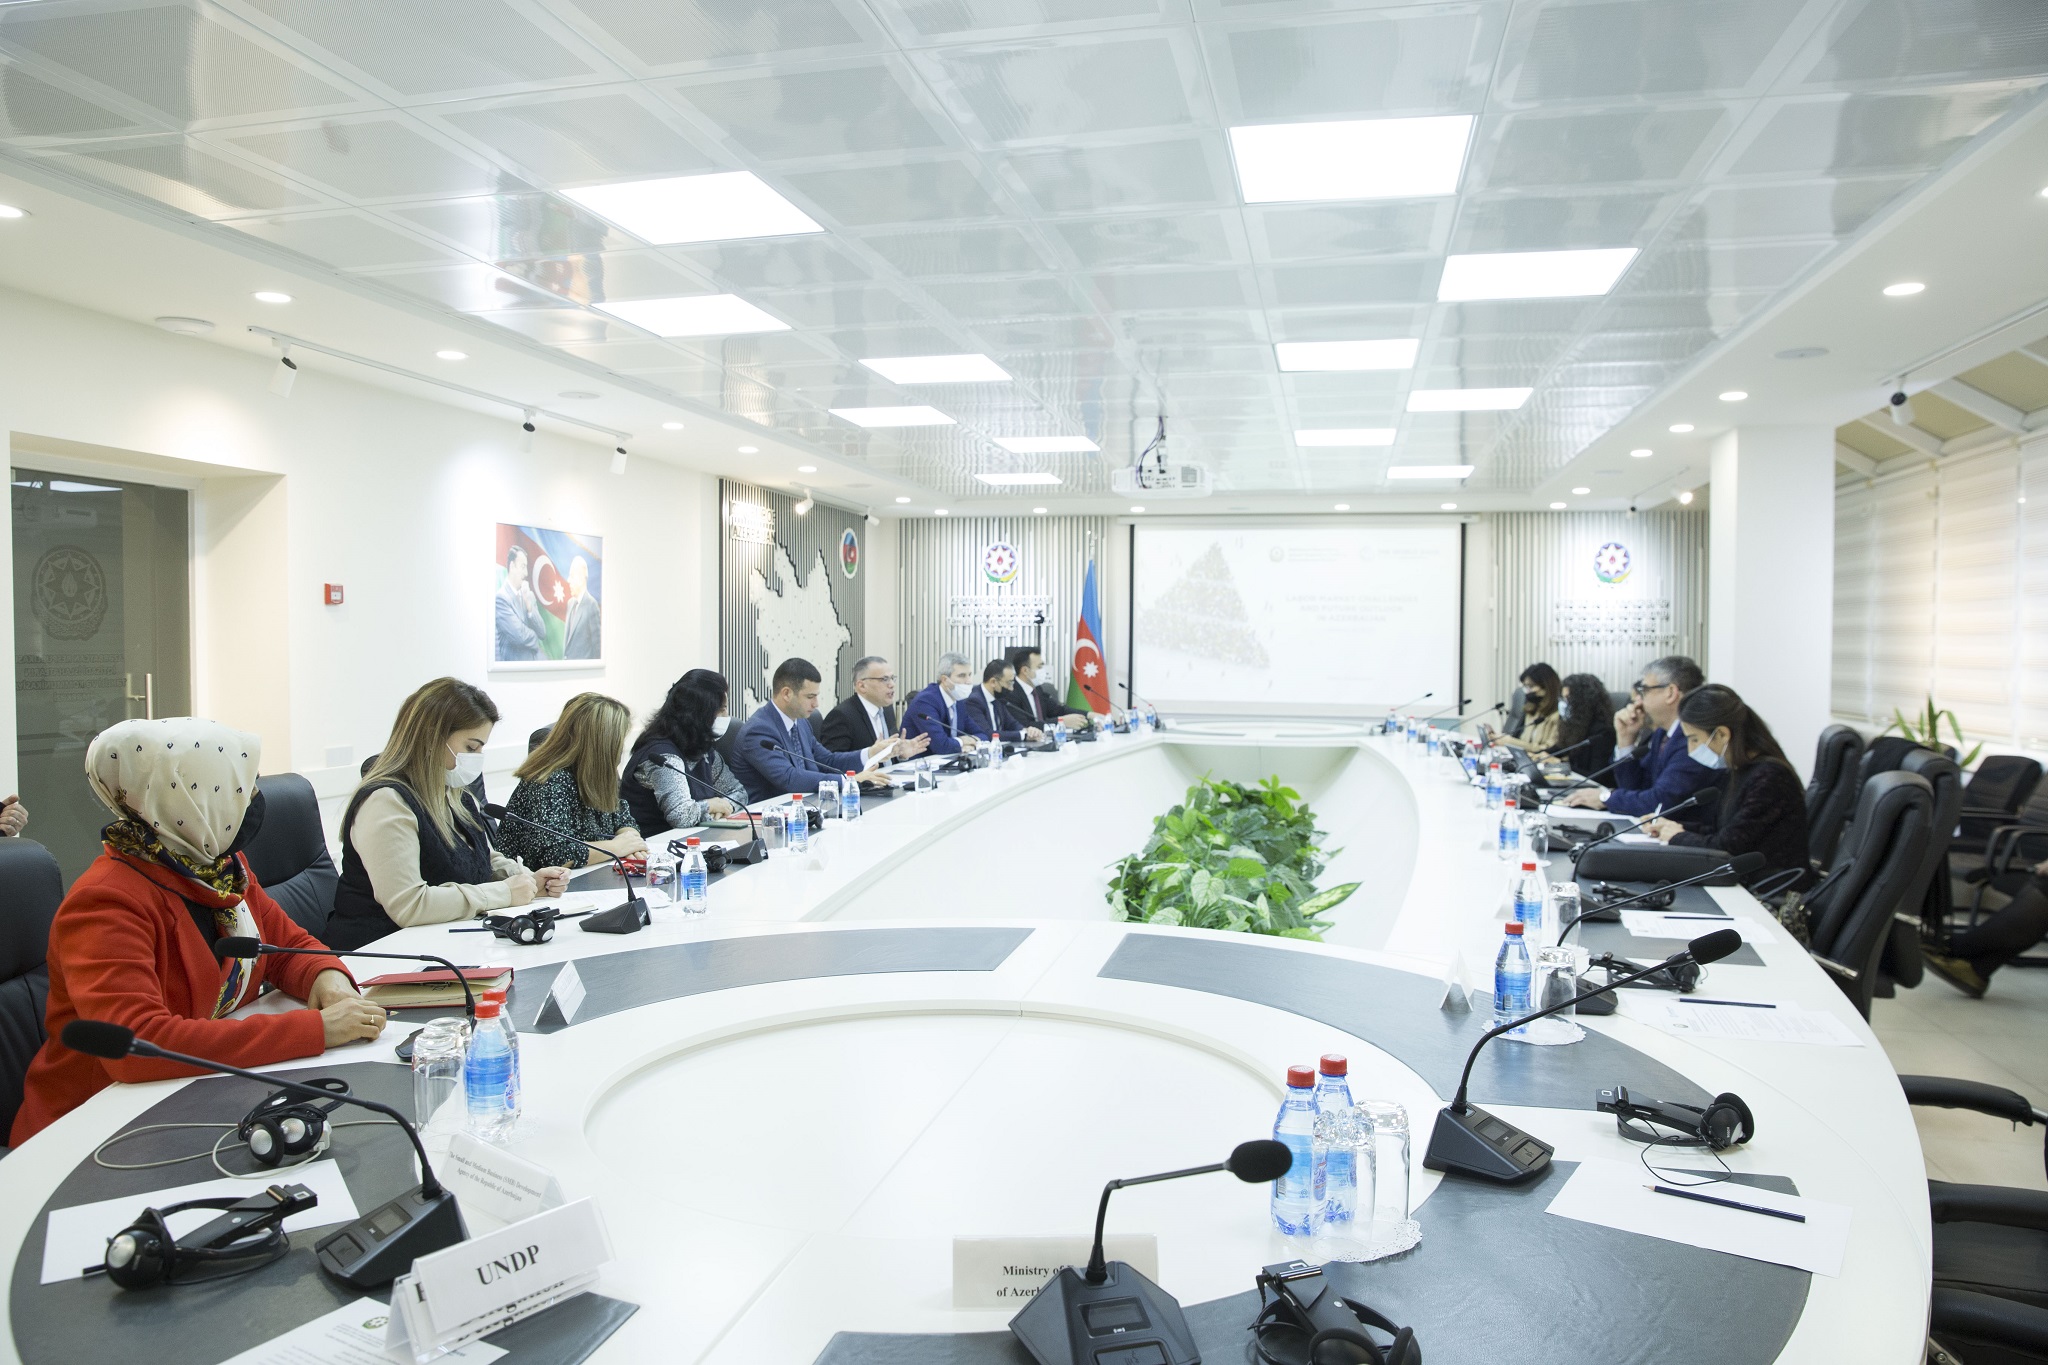 An event on "Labor market challenges and vision for the future in Azerbaijan" has been held